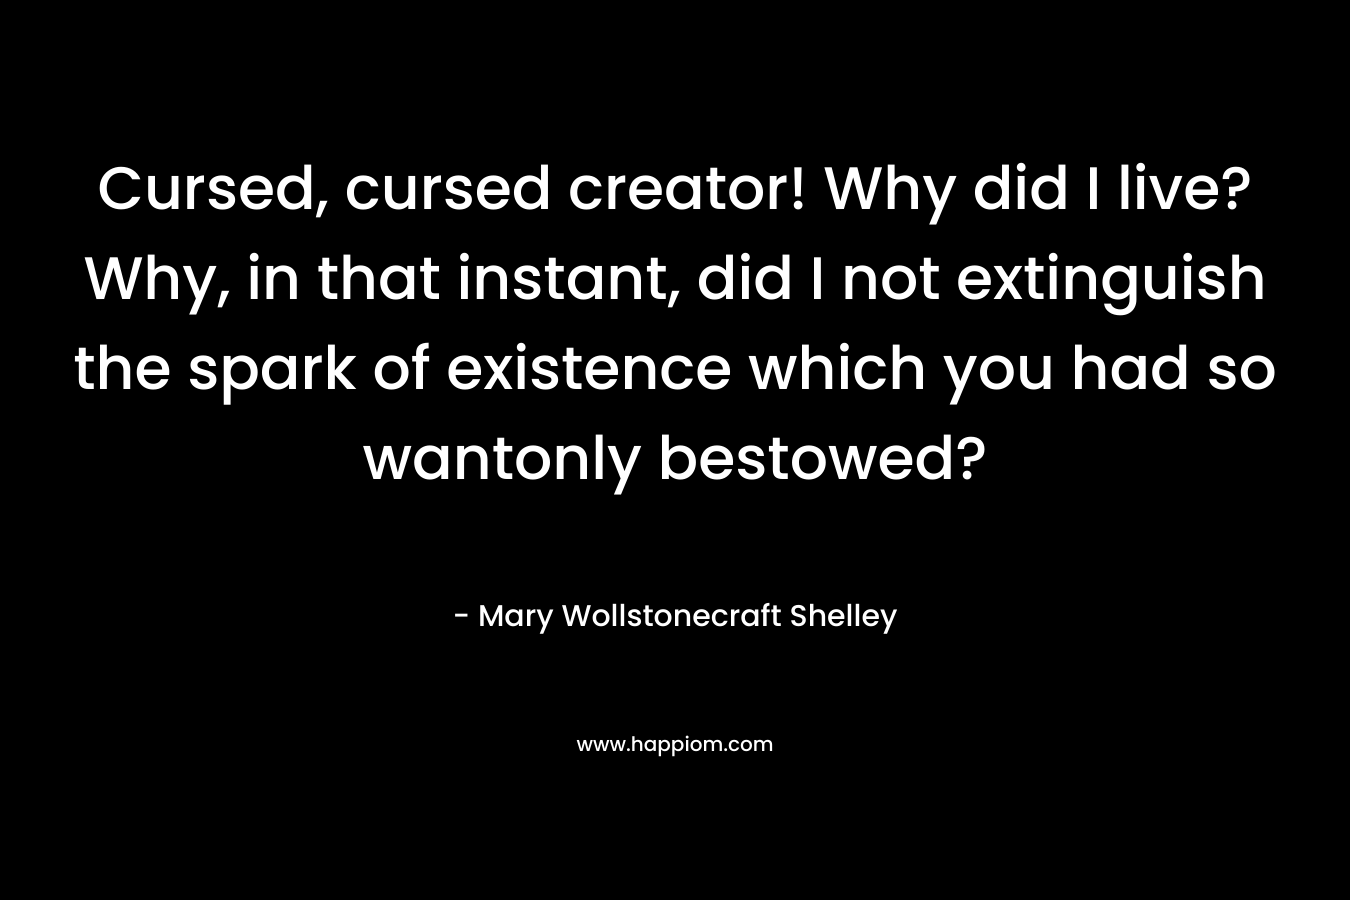 Cursed, cursed creator! Why did I live? Why, in that instant, did I not extinguish the spark of existence which you had so wantonly bestowed? – Mary Wollstonecraft Shelley